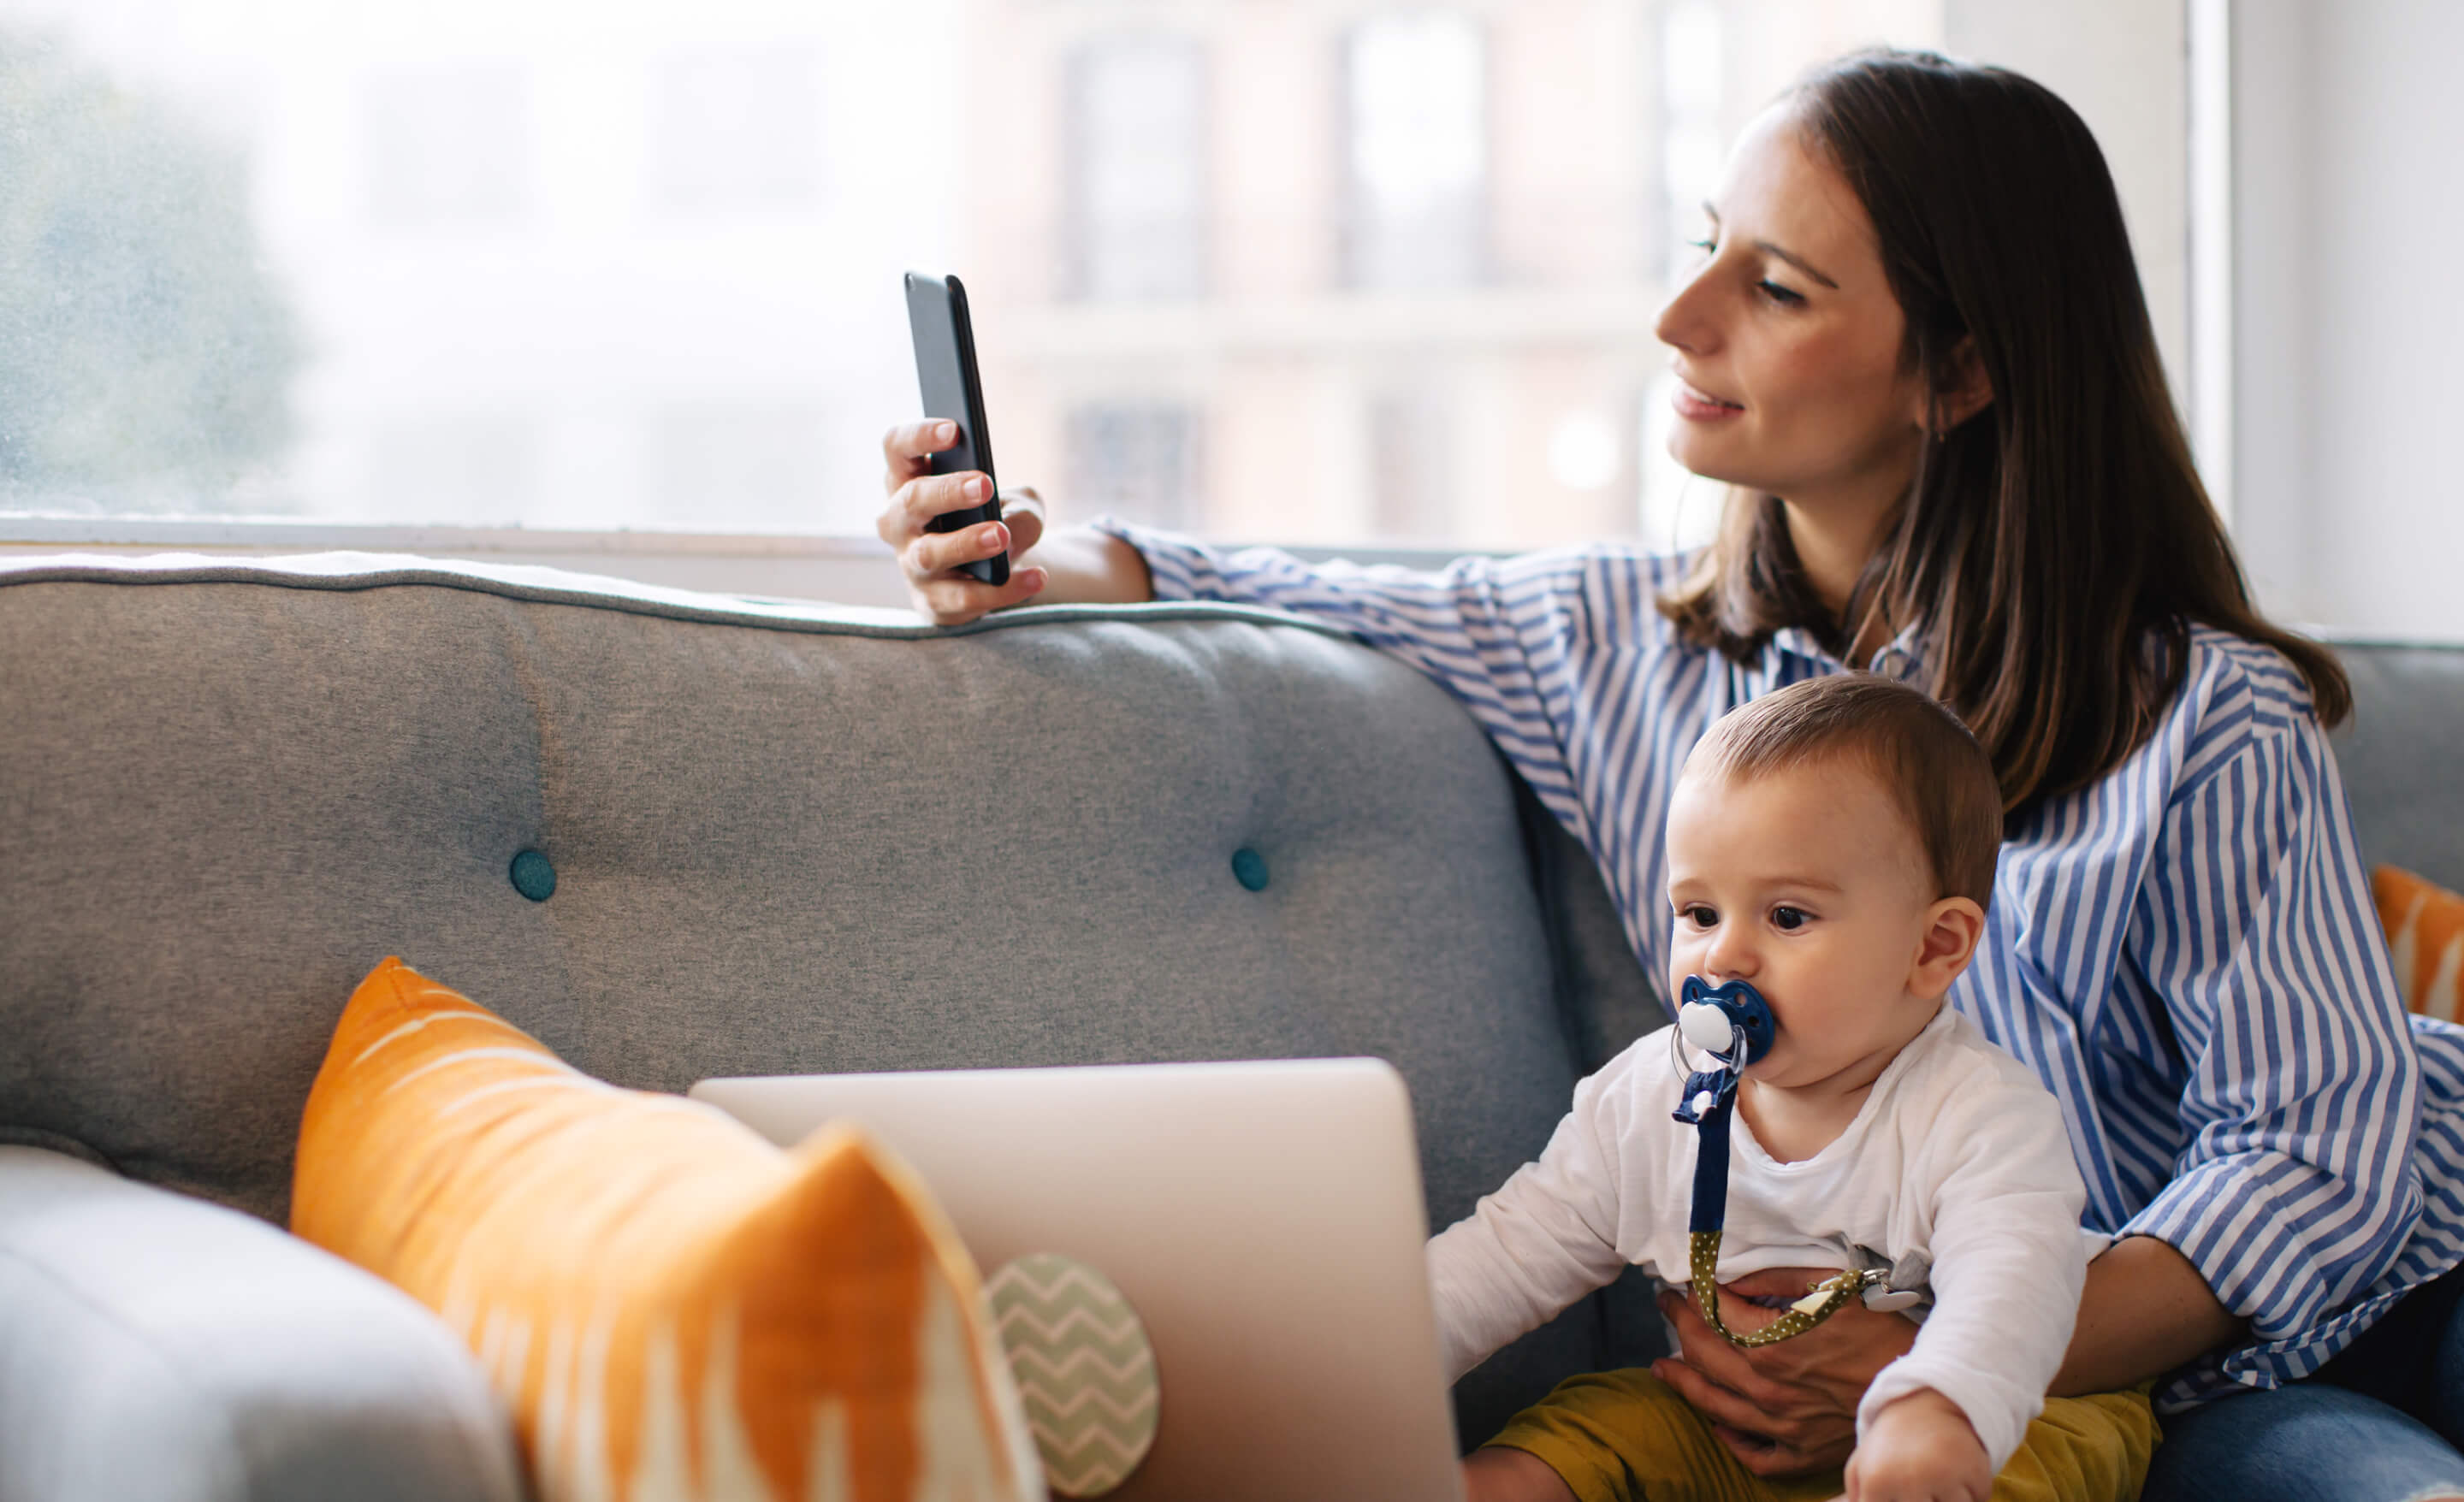 Long-haired brunette woman in stirped blue shirt sits on a couch with a toddler while looking at her phone.